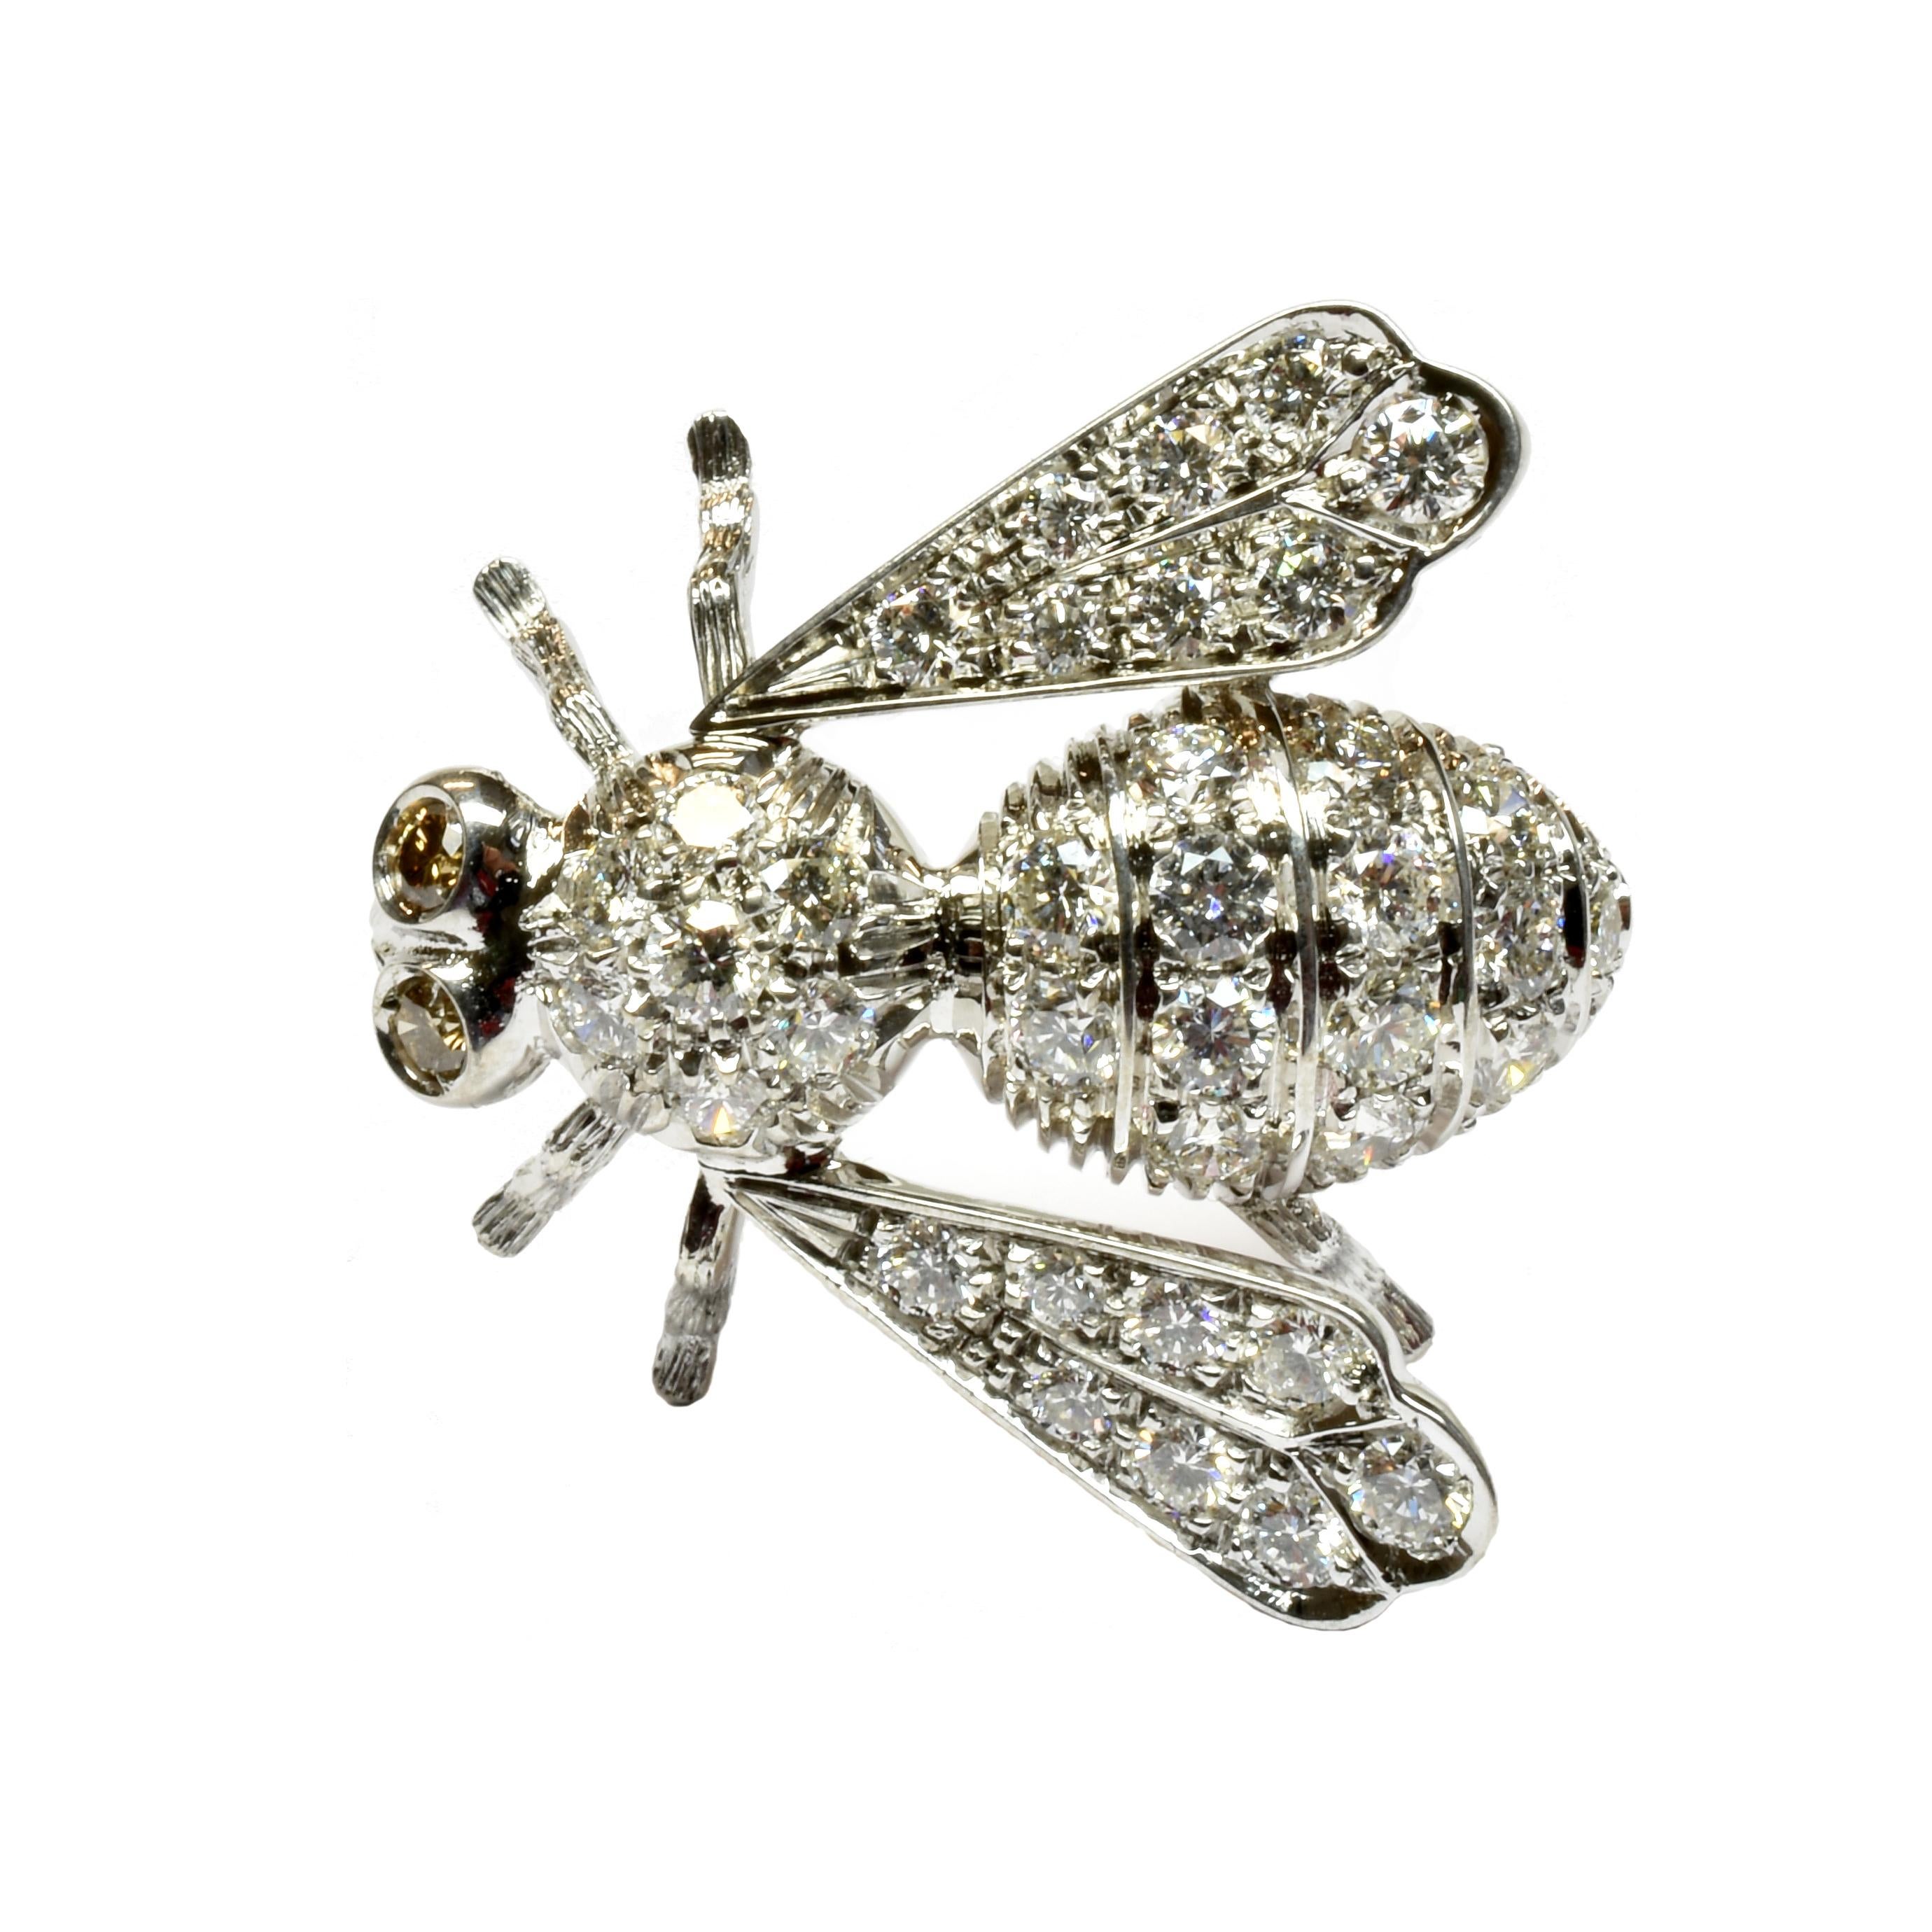 18 Kt Gold Bee Brooch with White Diamonds and Champagne Diamonds eyes.
Handmade in our Atelier in Valenza Italy.
Looks perfect on a Business Jacket or on a Cocktail Dress. 
This nice Brooch can be made in any combination of Colour Stones and